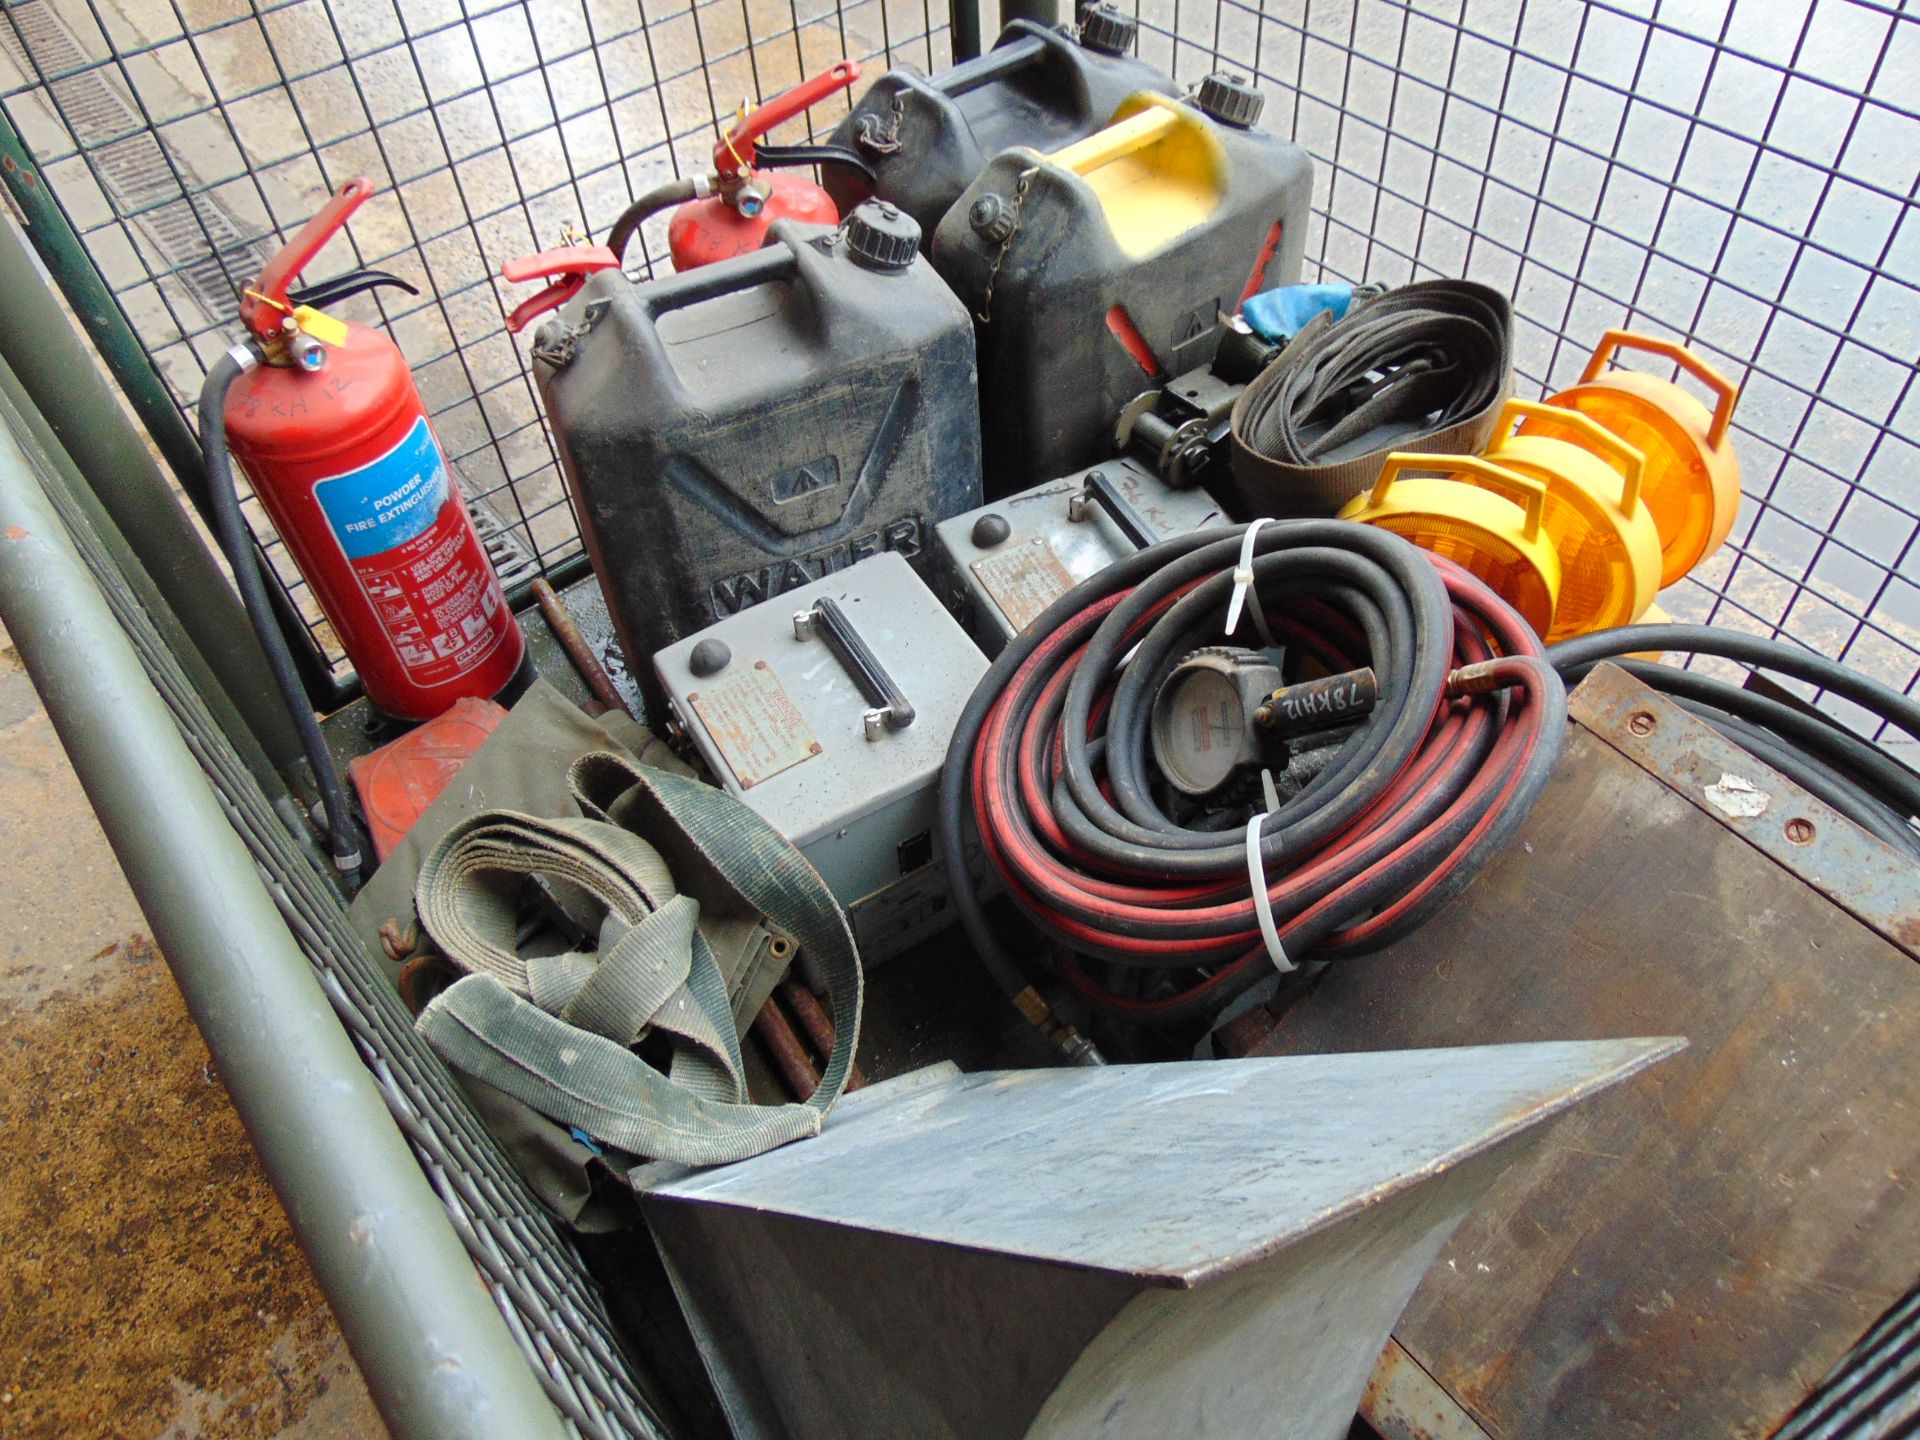 1 x Stillage Air Lines Wheel Chocks, Jerry Cans, Cooking Vessels, Ratchet Straps, Fire Extinguisher - Image 5 of 6